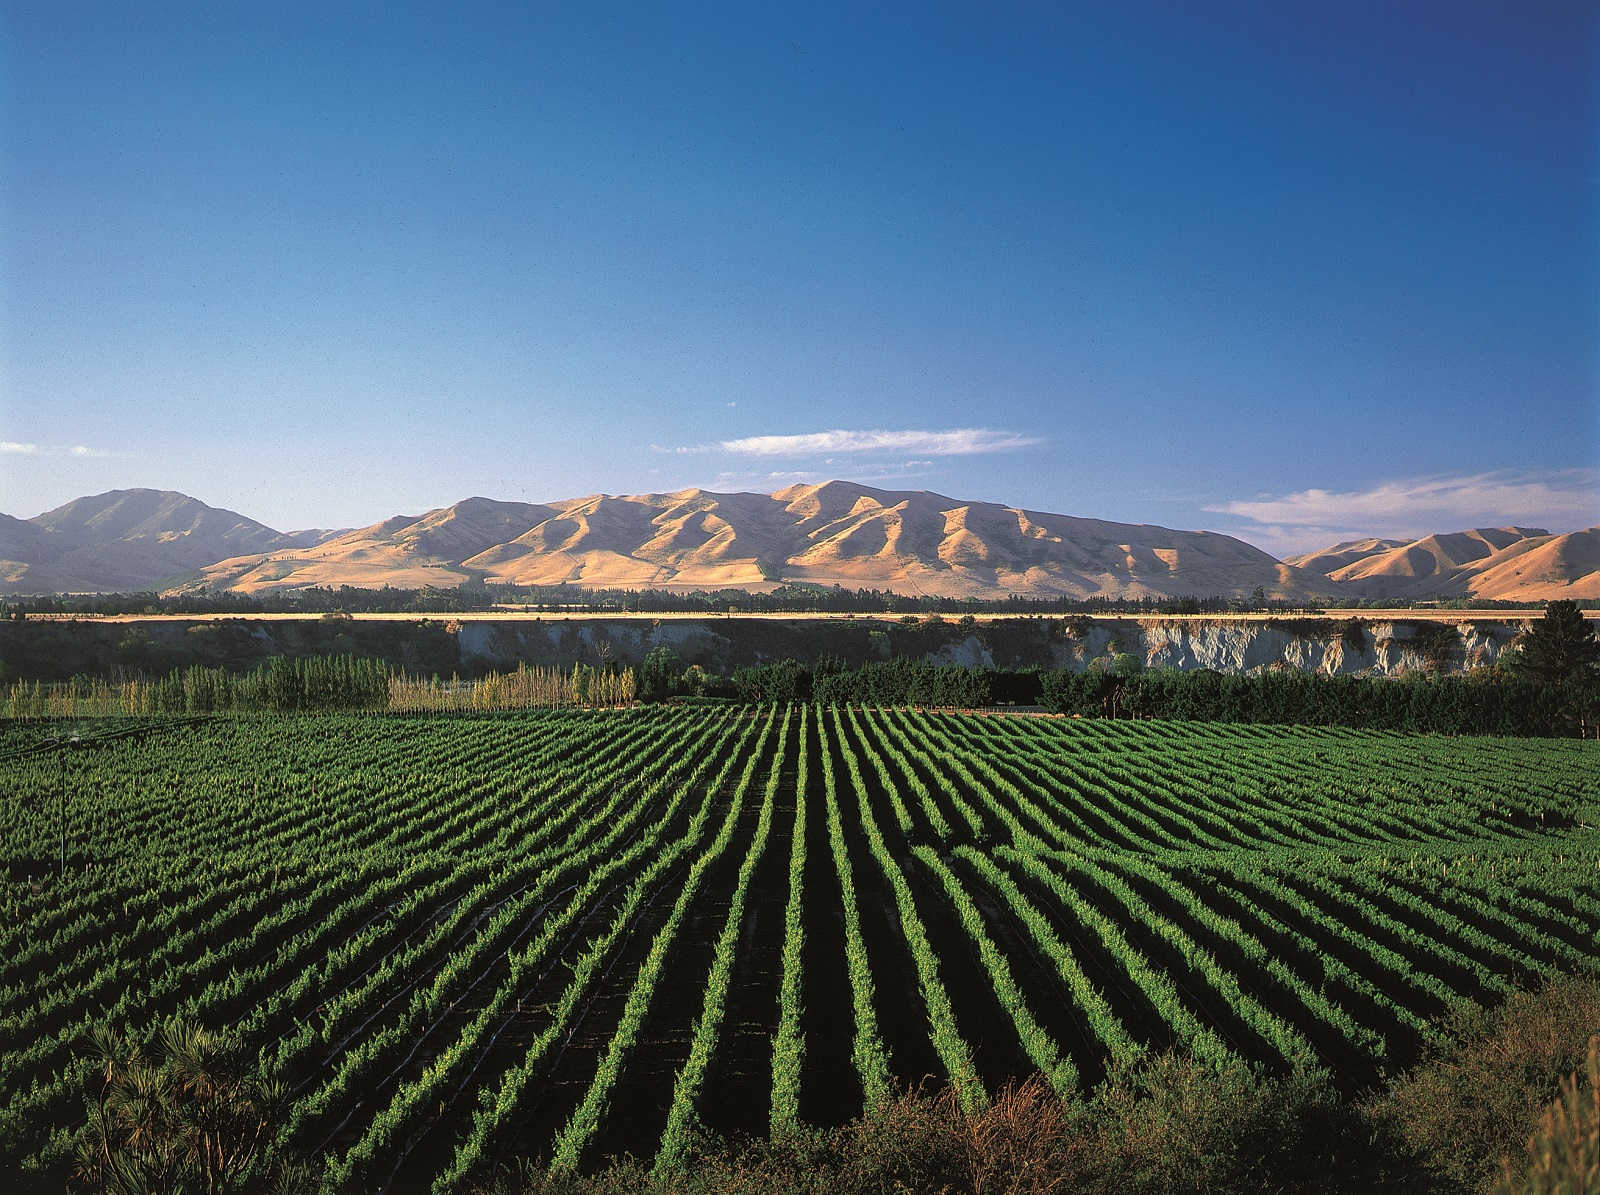 Saint clair estate, green vines with mountains in the back